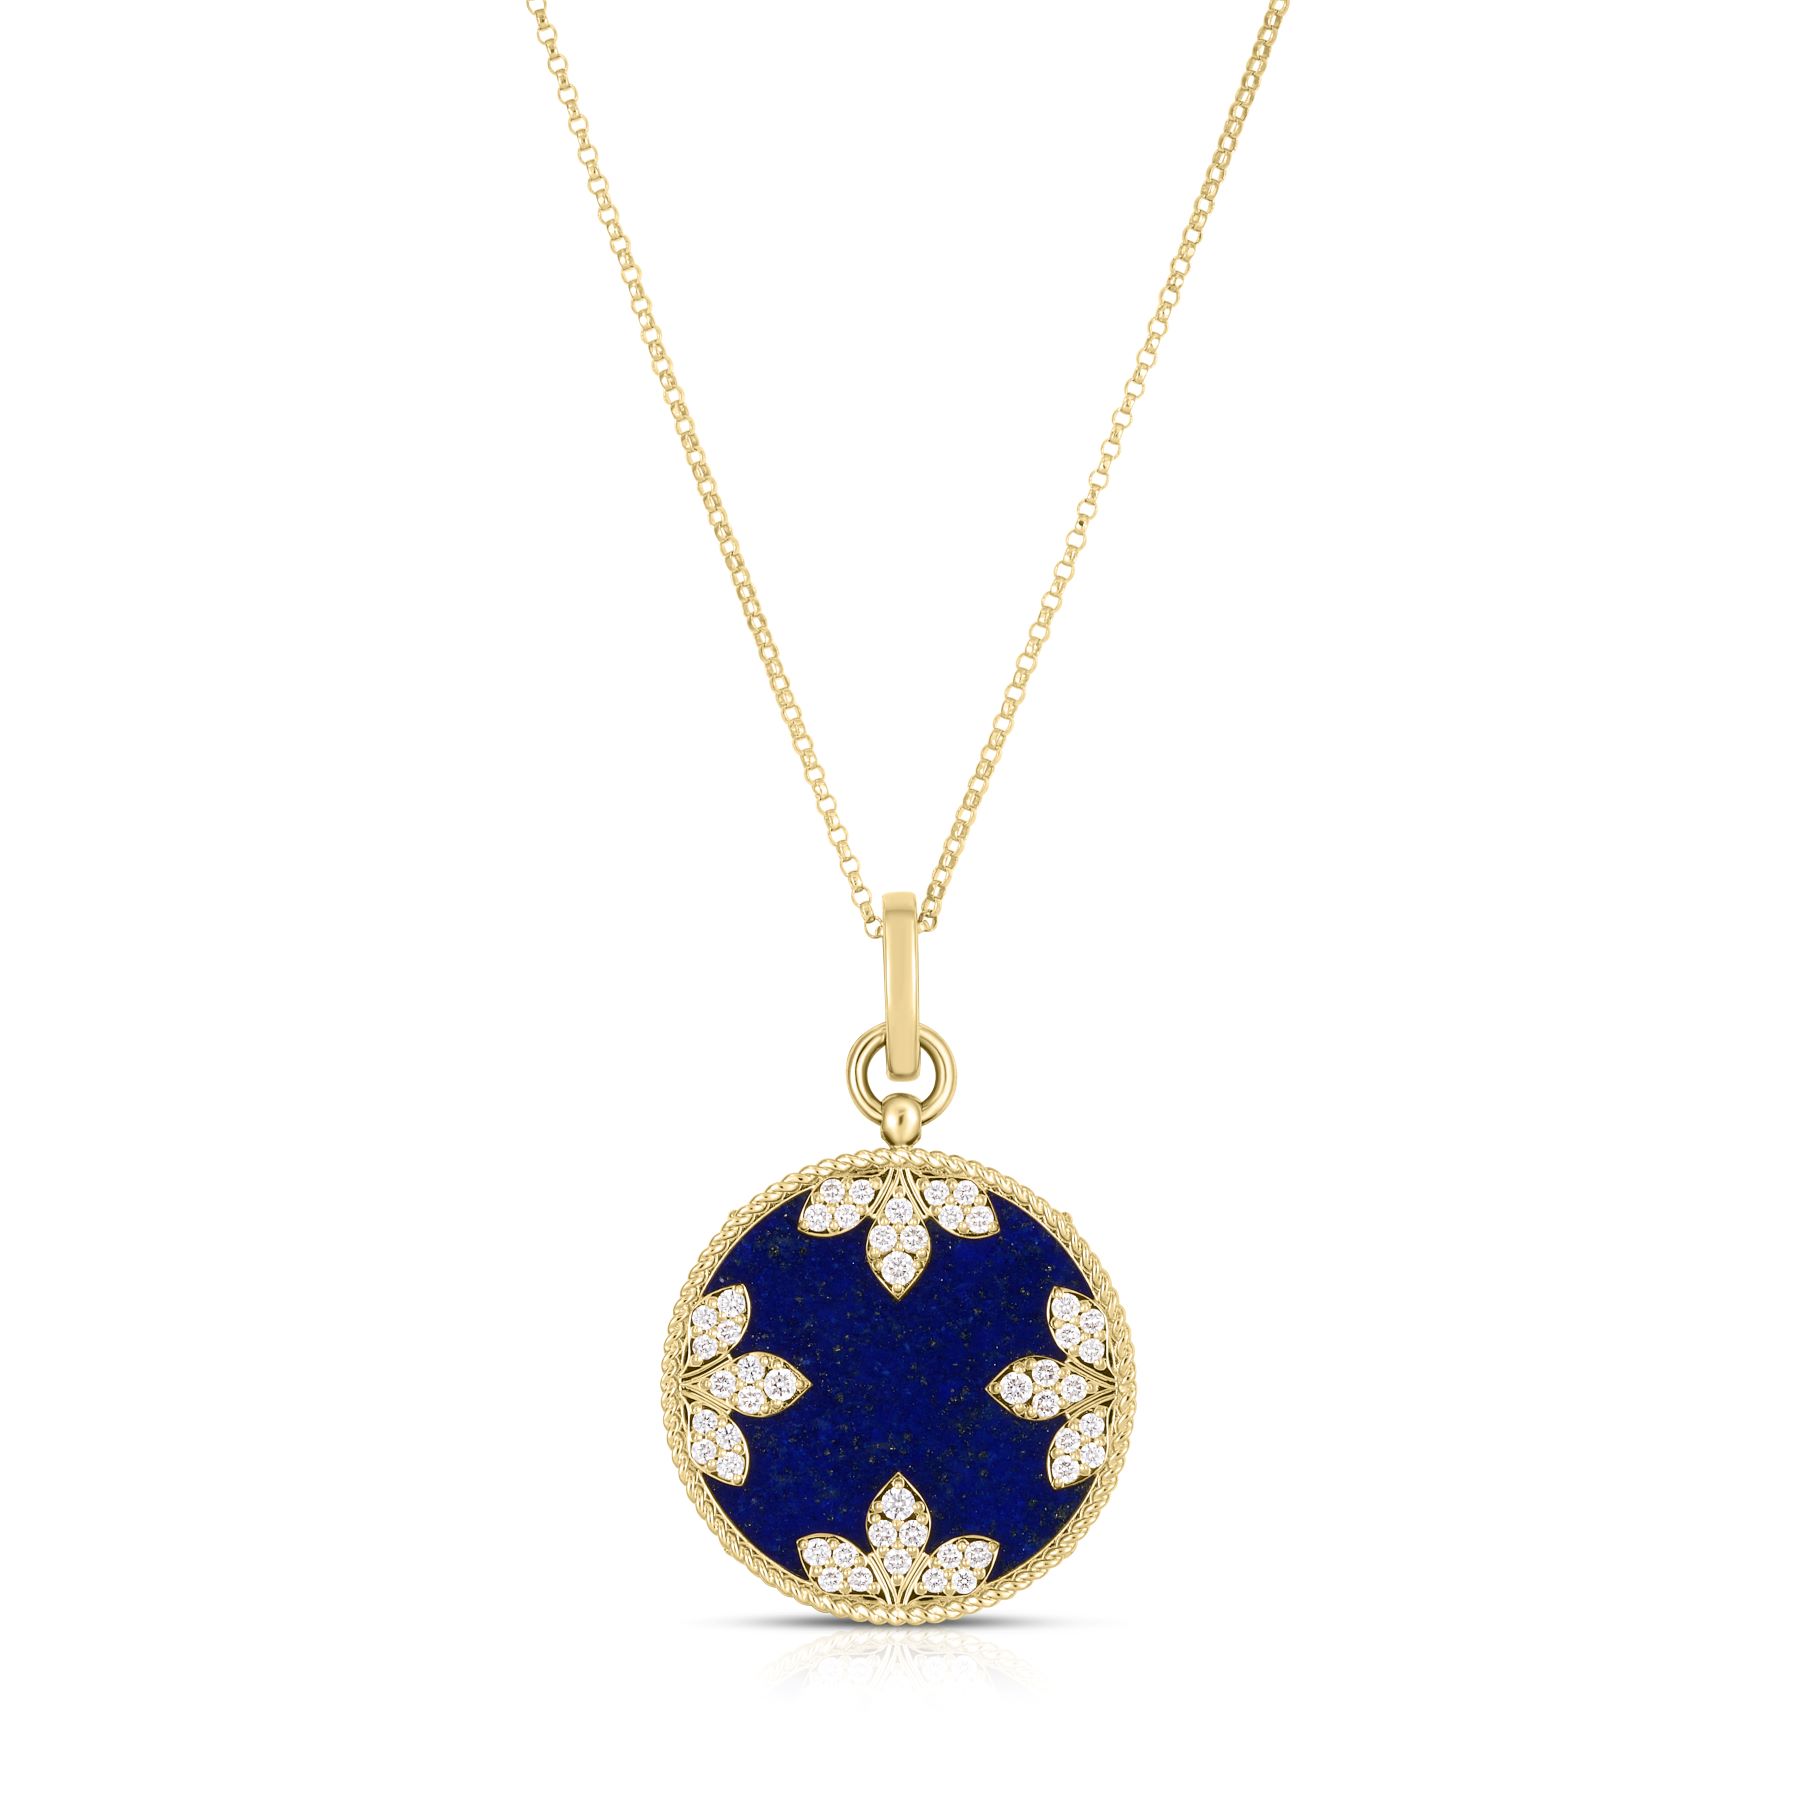 18KYellow Gold Diamond and Lapis Medallion Charm Necklace - PDRC ...